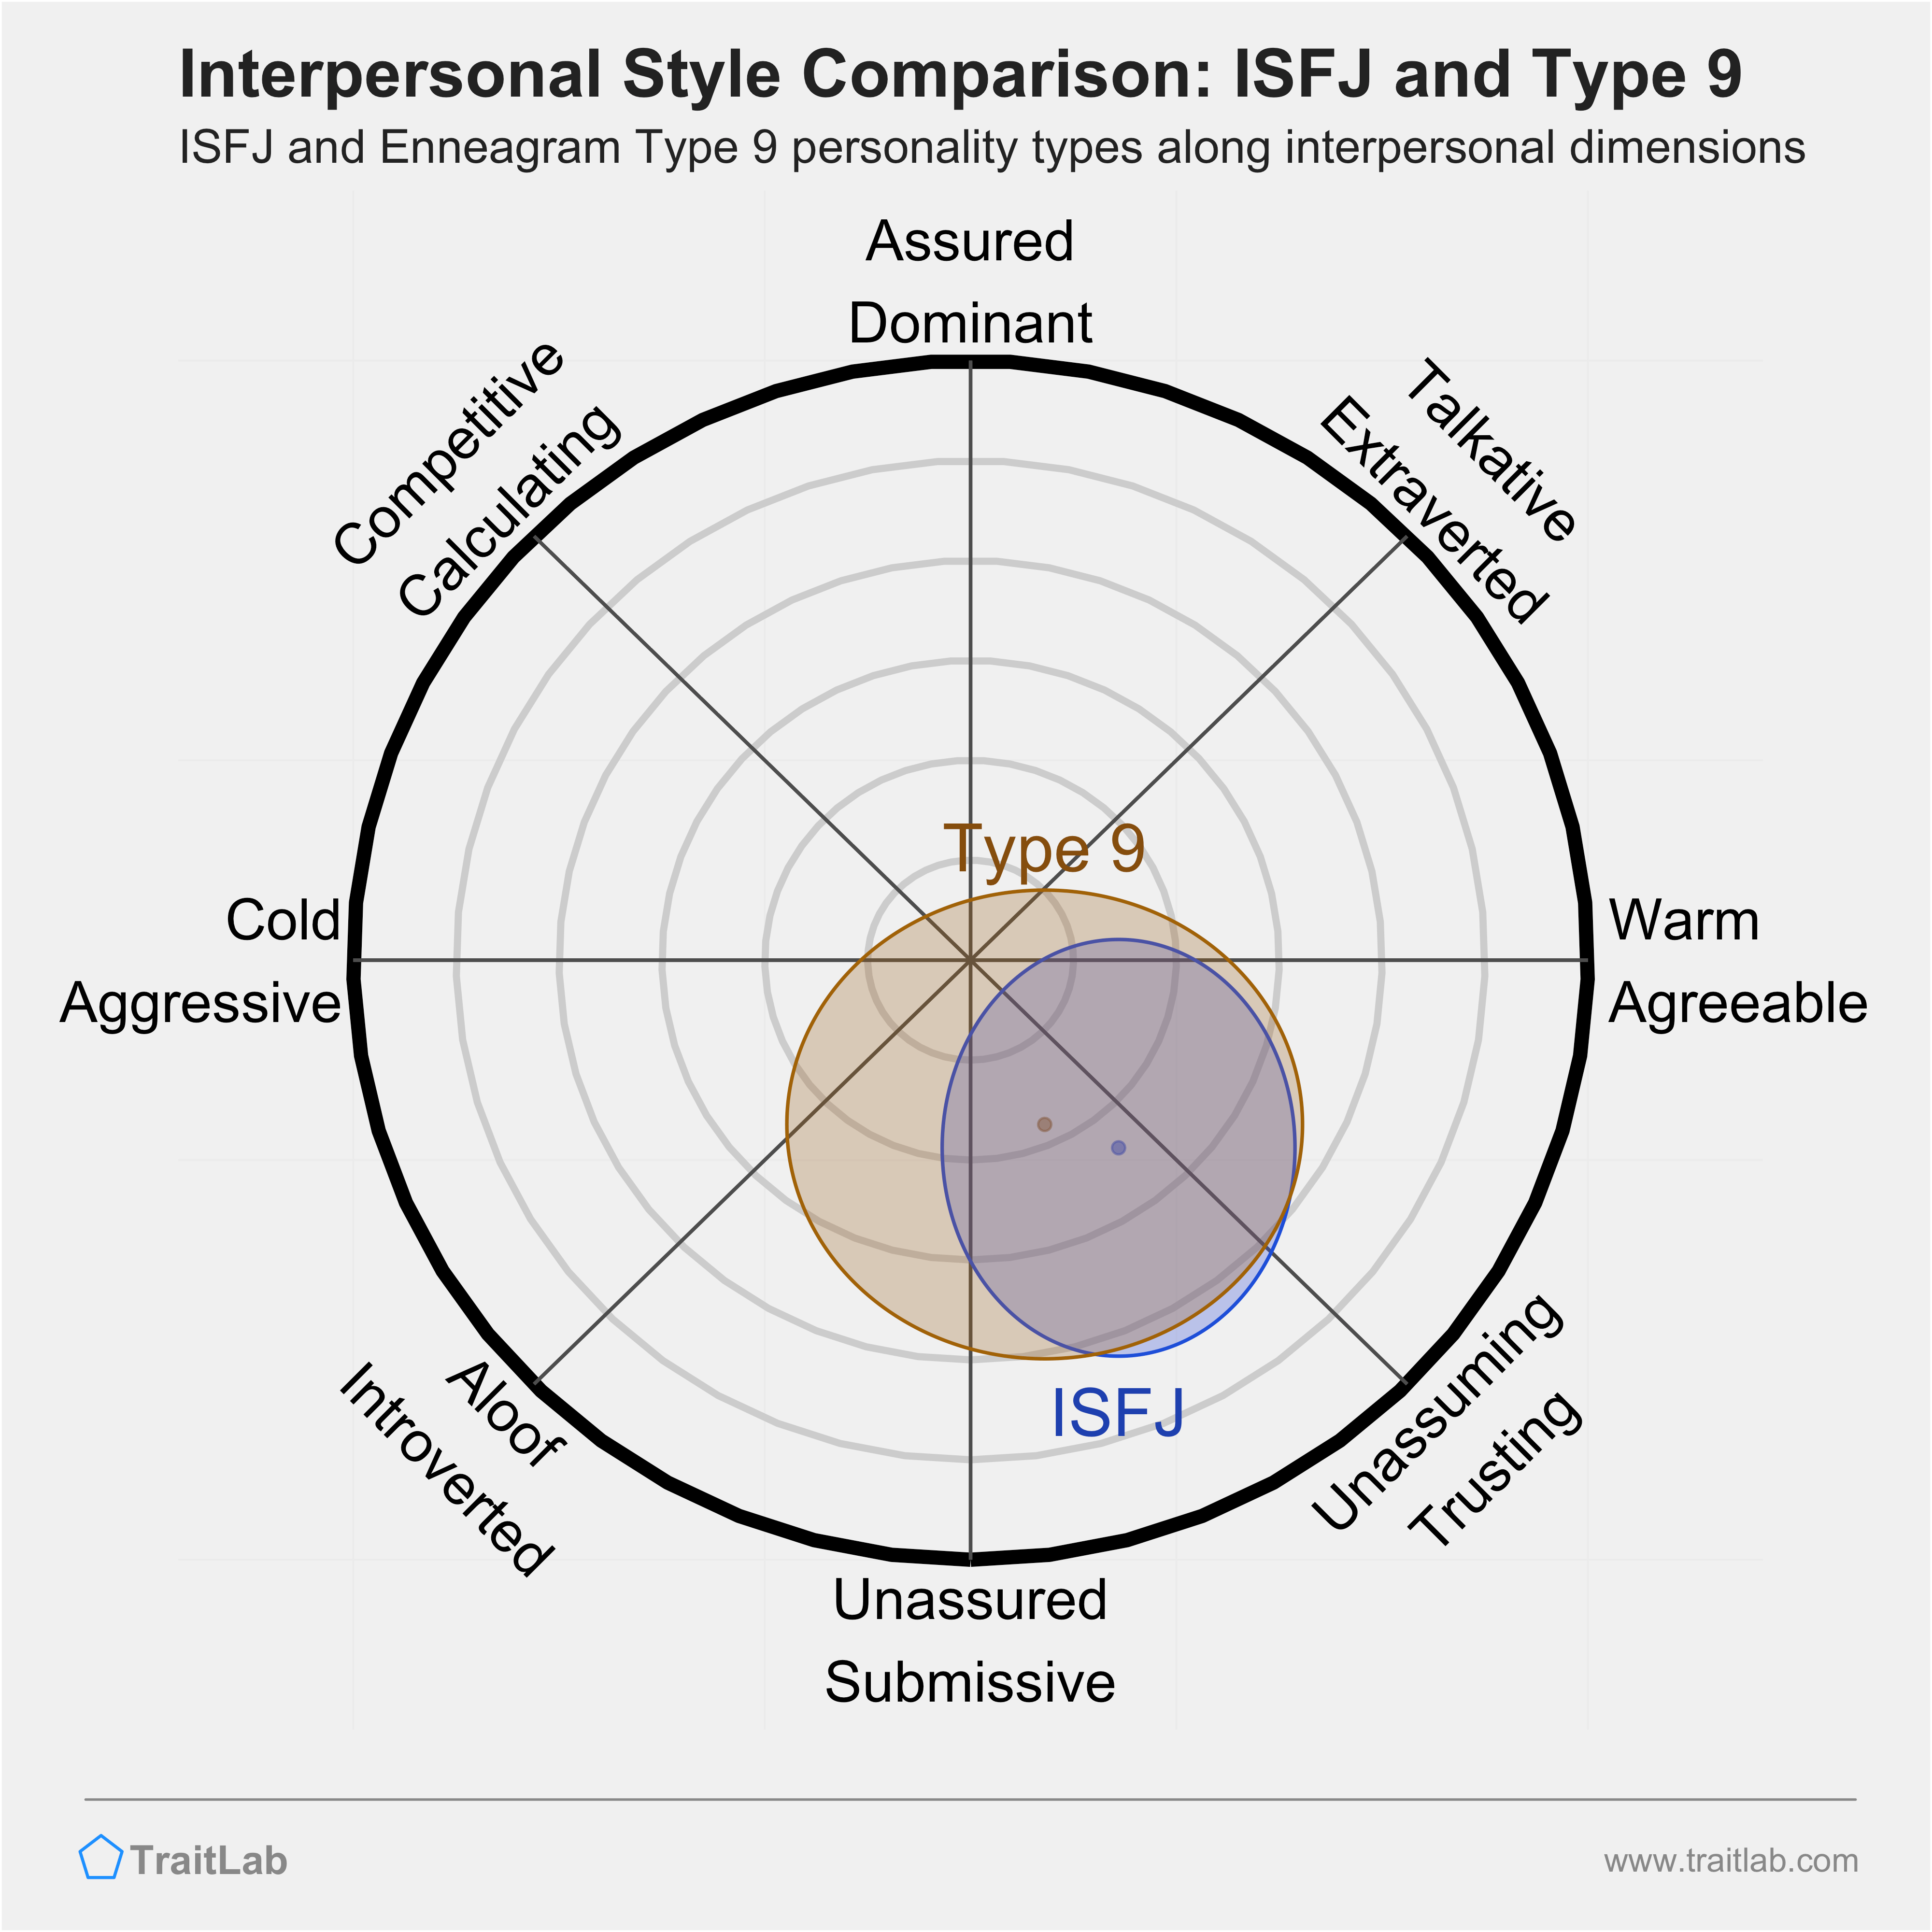 Enneagram ISFJ and Type 9 comparison across interpersonal dimensions